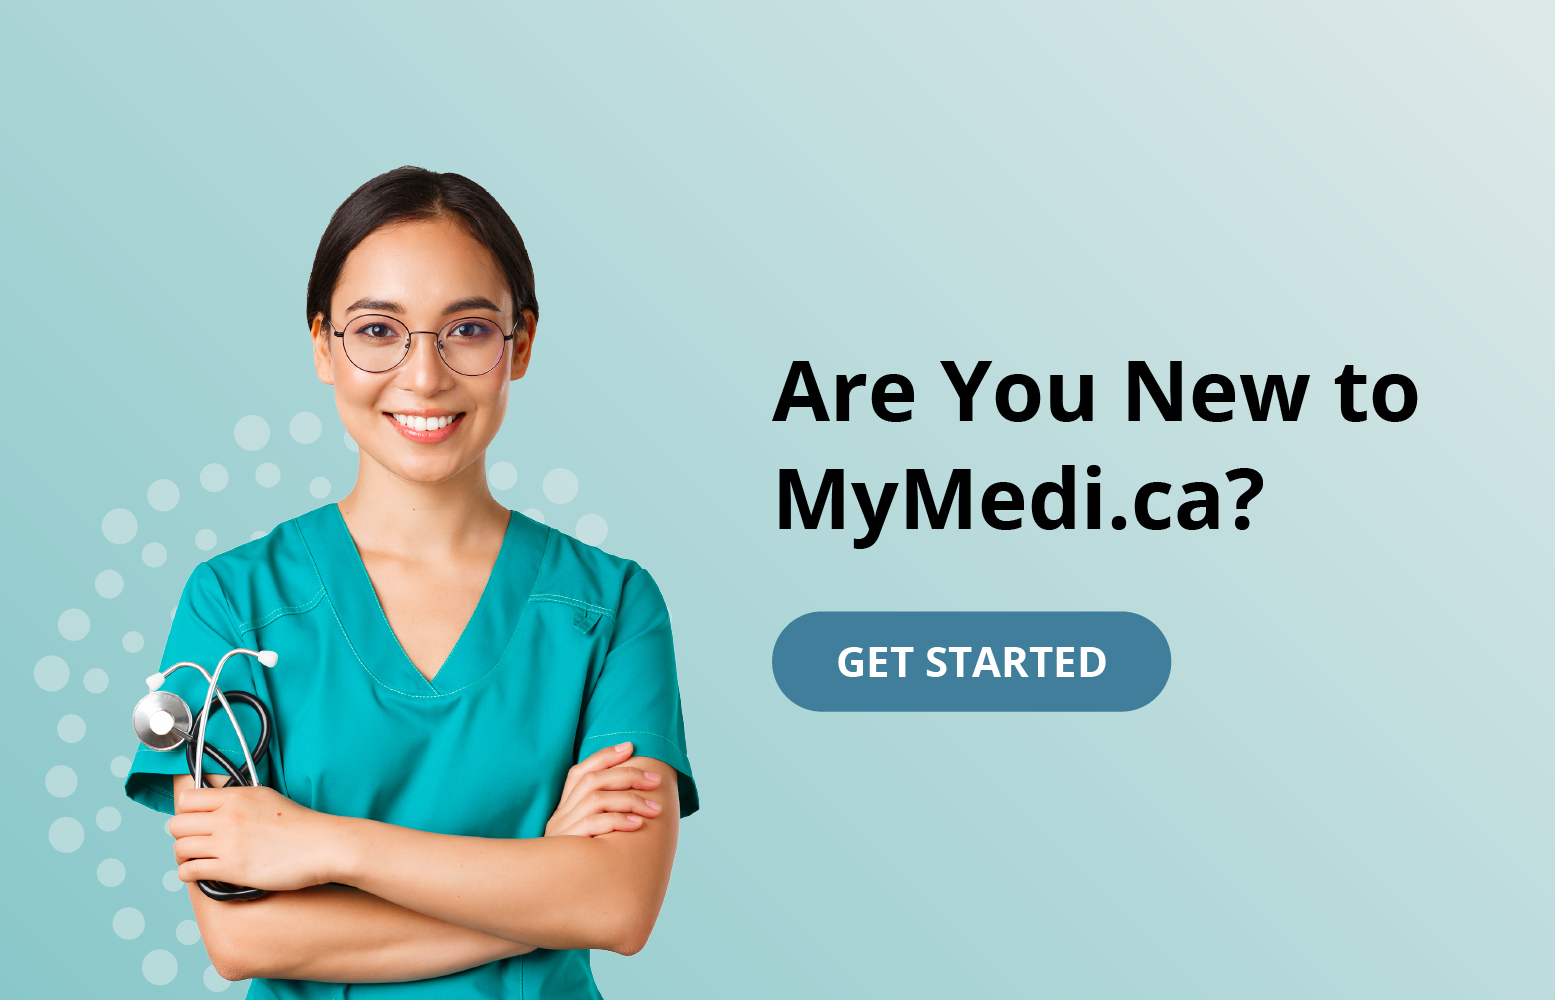 Are you new to mymedi.ca? Get Started!